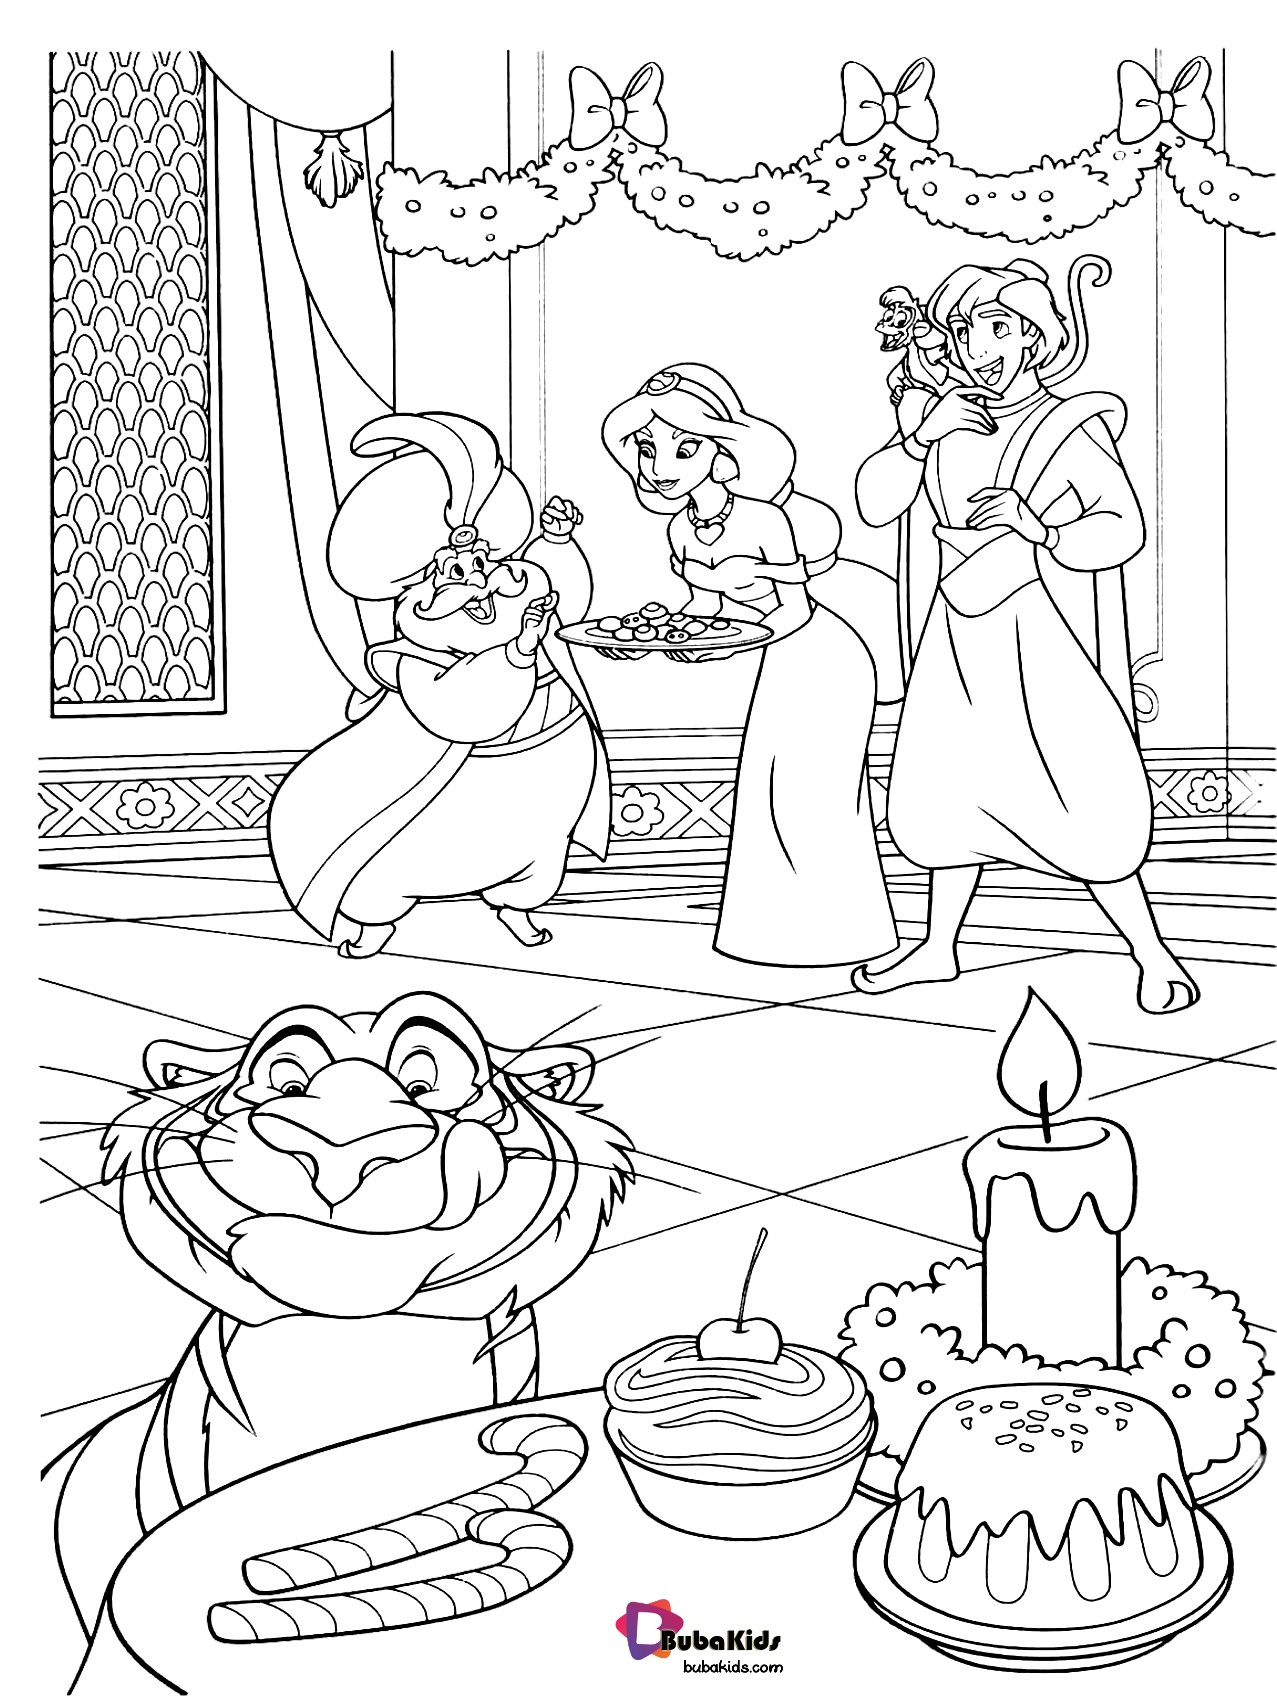 Free download to print Aladdin coloring page.